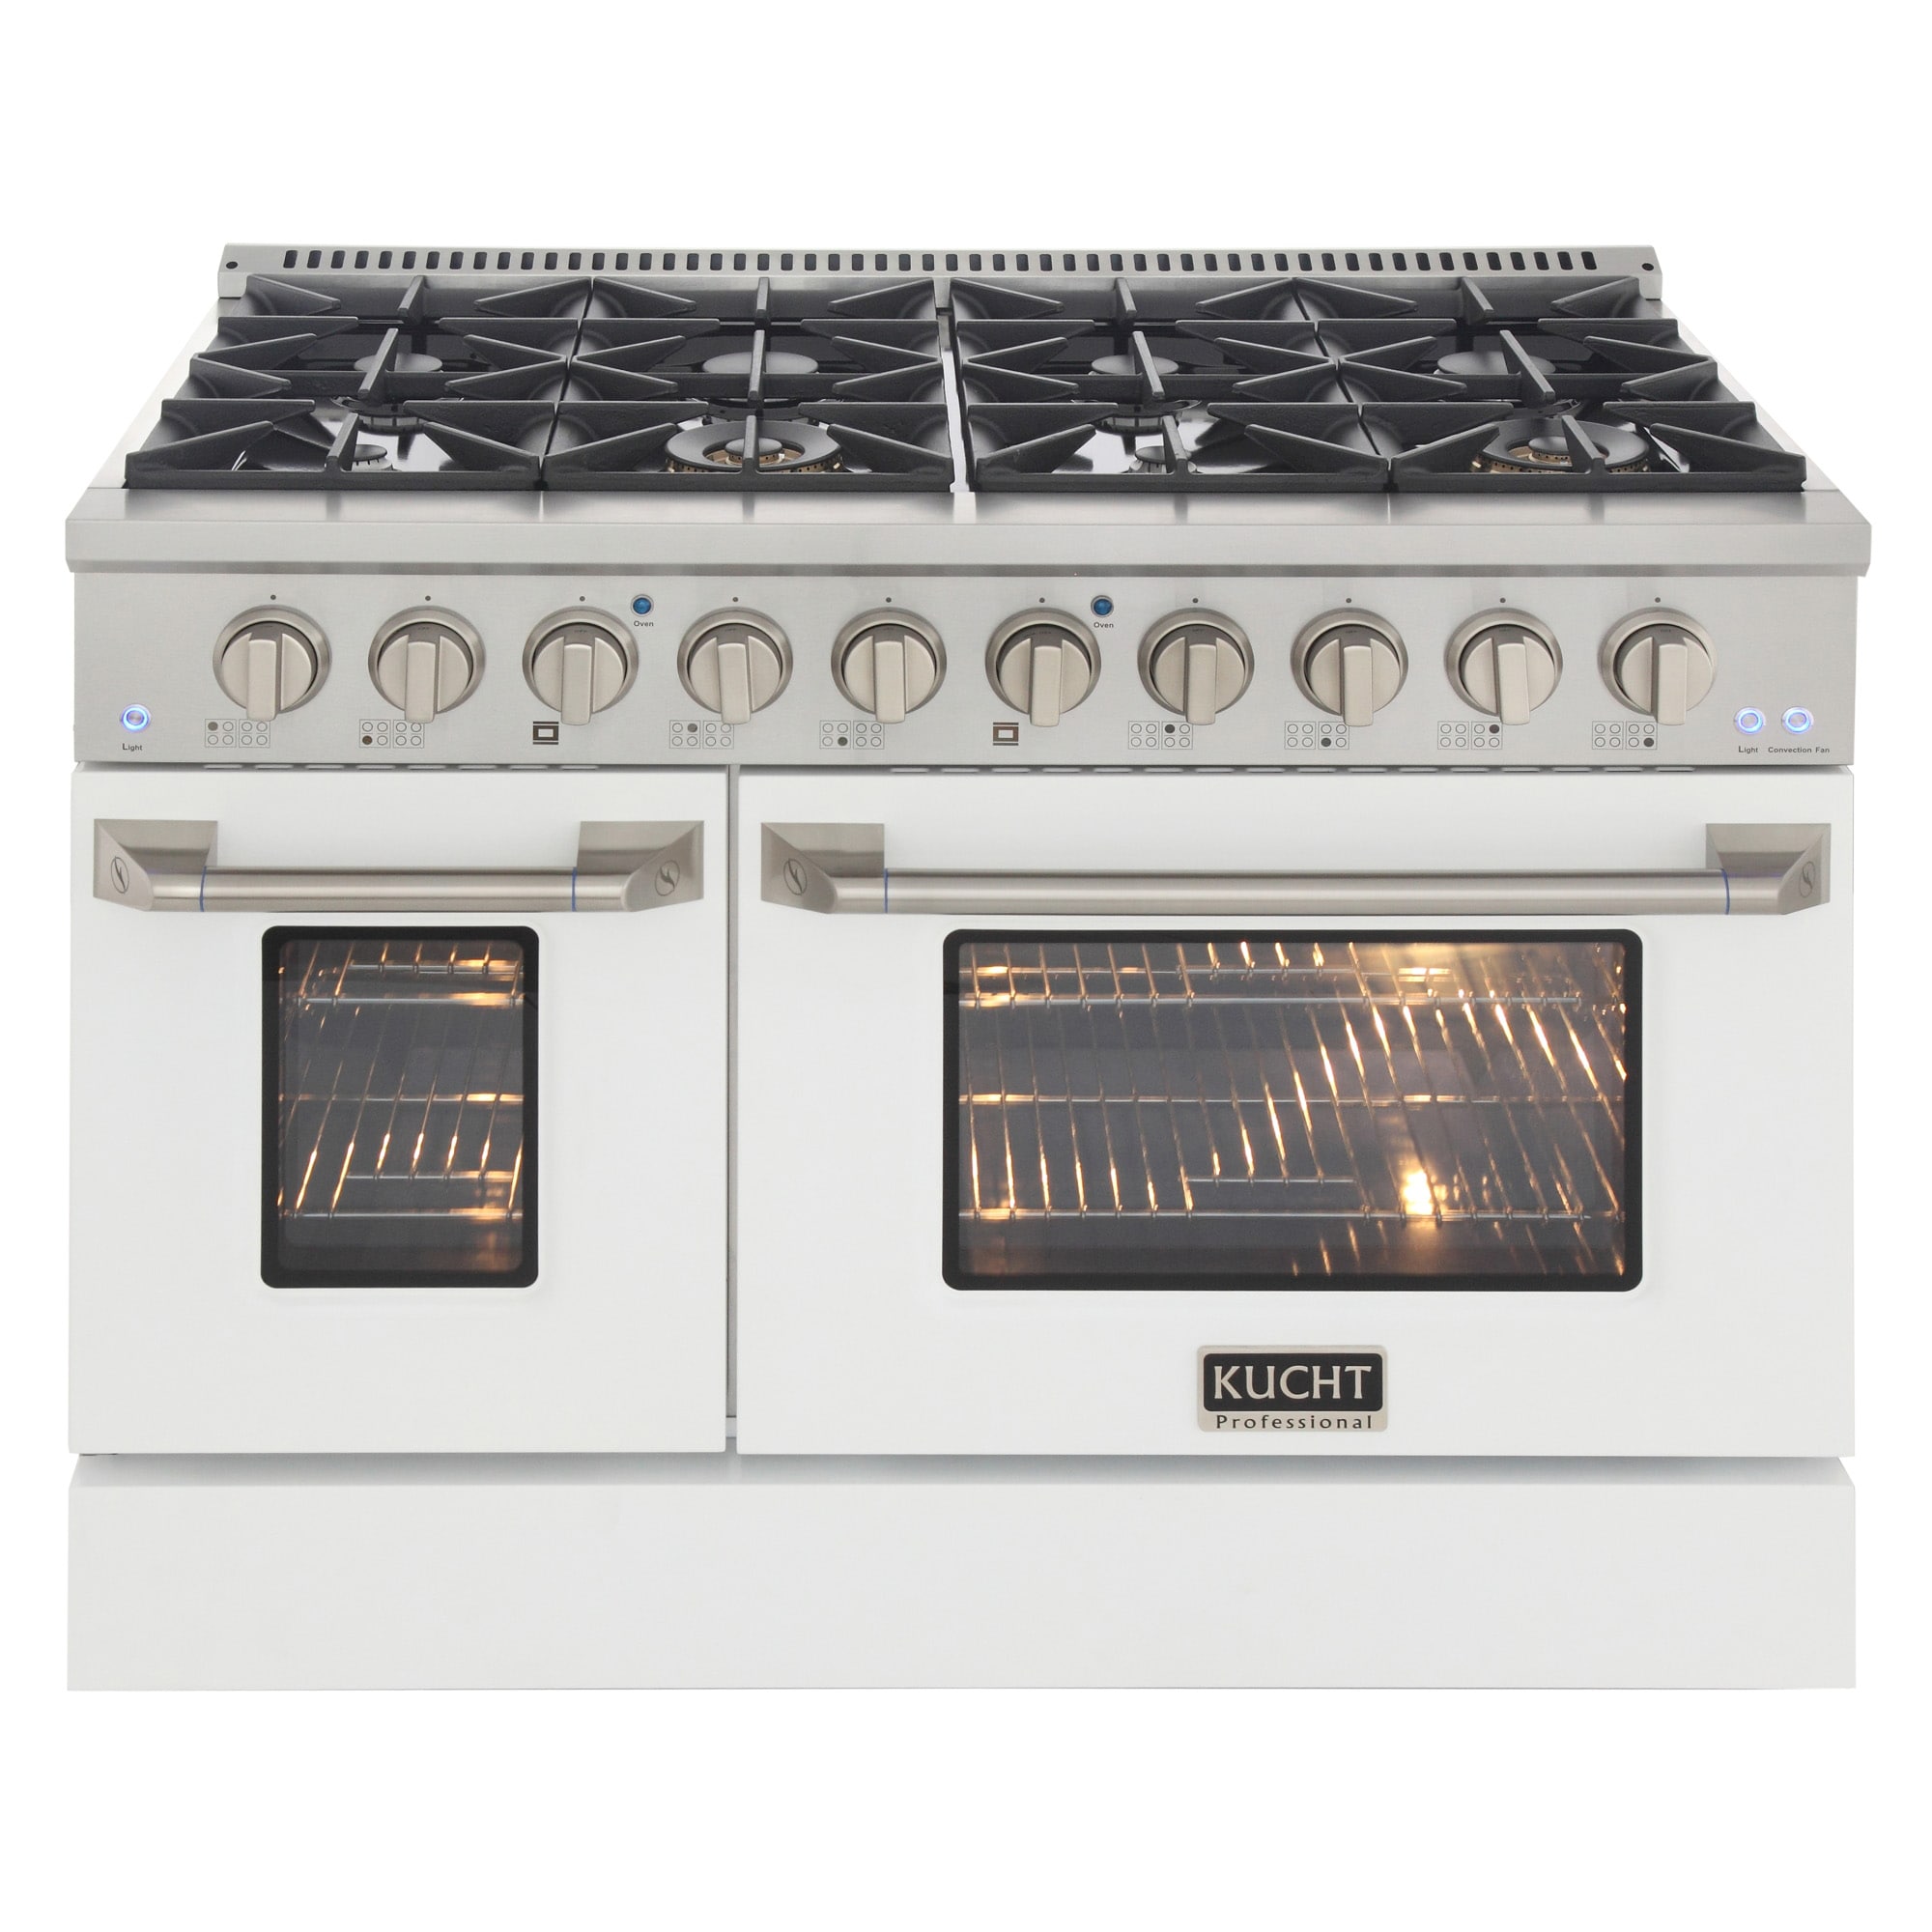 Kucht Professional 48 Stainless Steel Natural GAS Range in Silver/White - KNG481-W